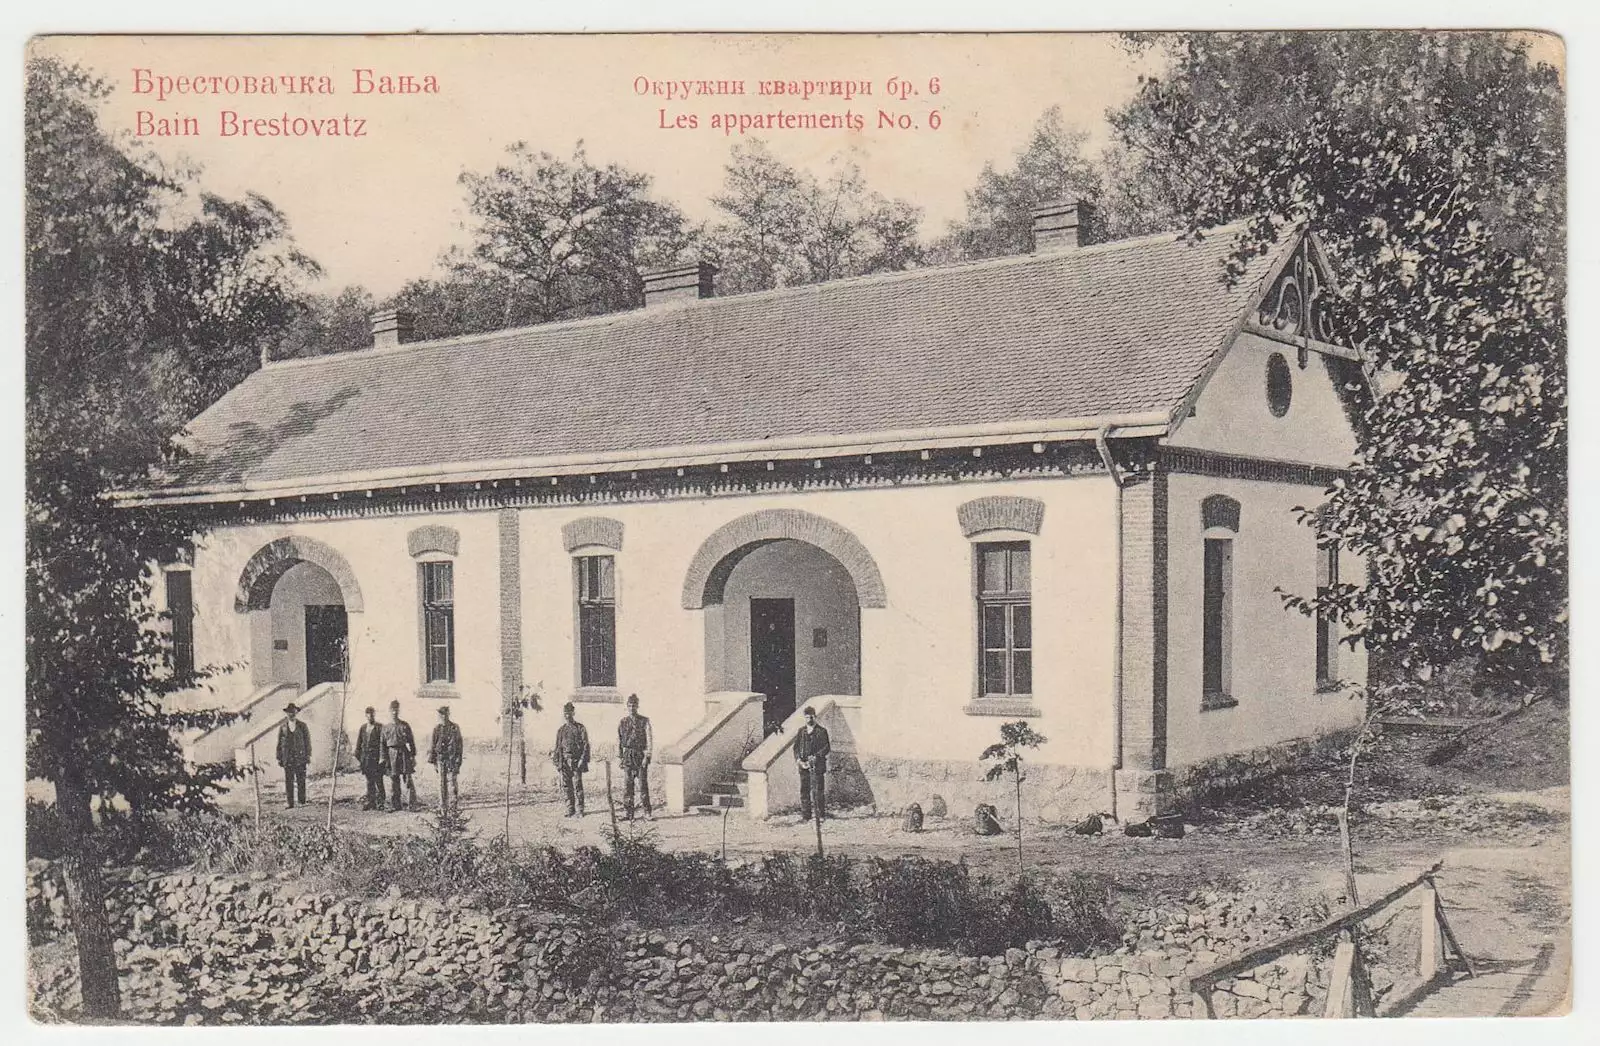 Brestovačka Banja, Museum of Mining and Metallurgy in Bor, taken from the Museum's Facebook page